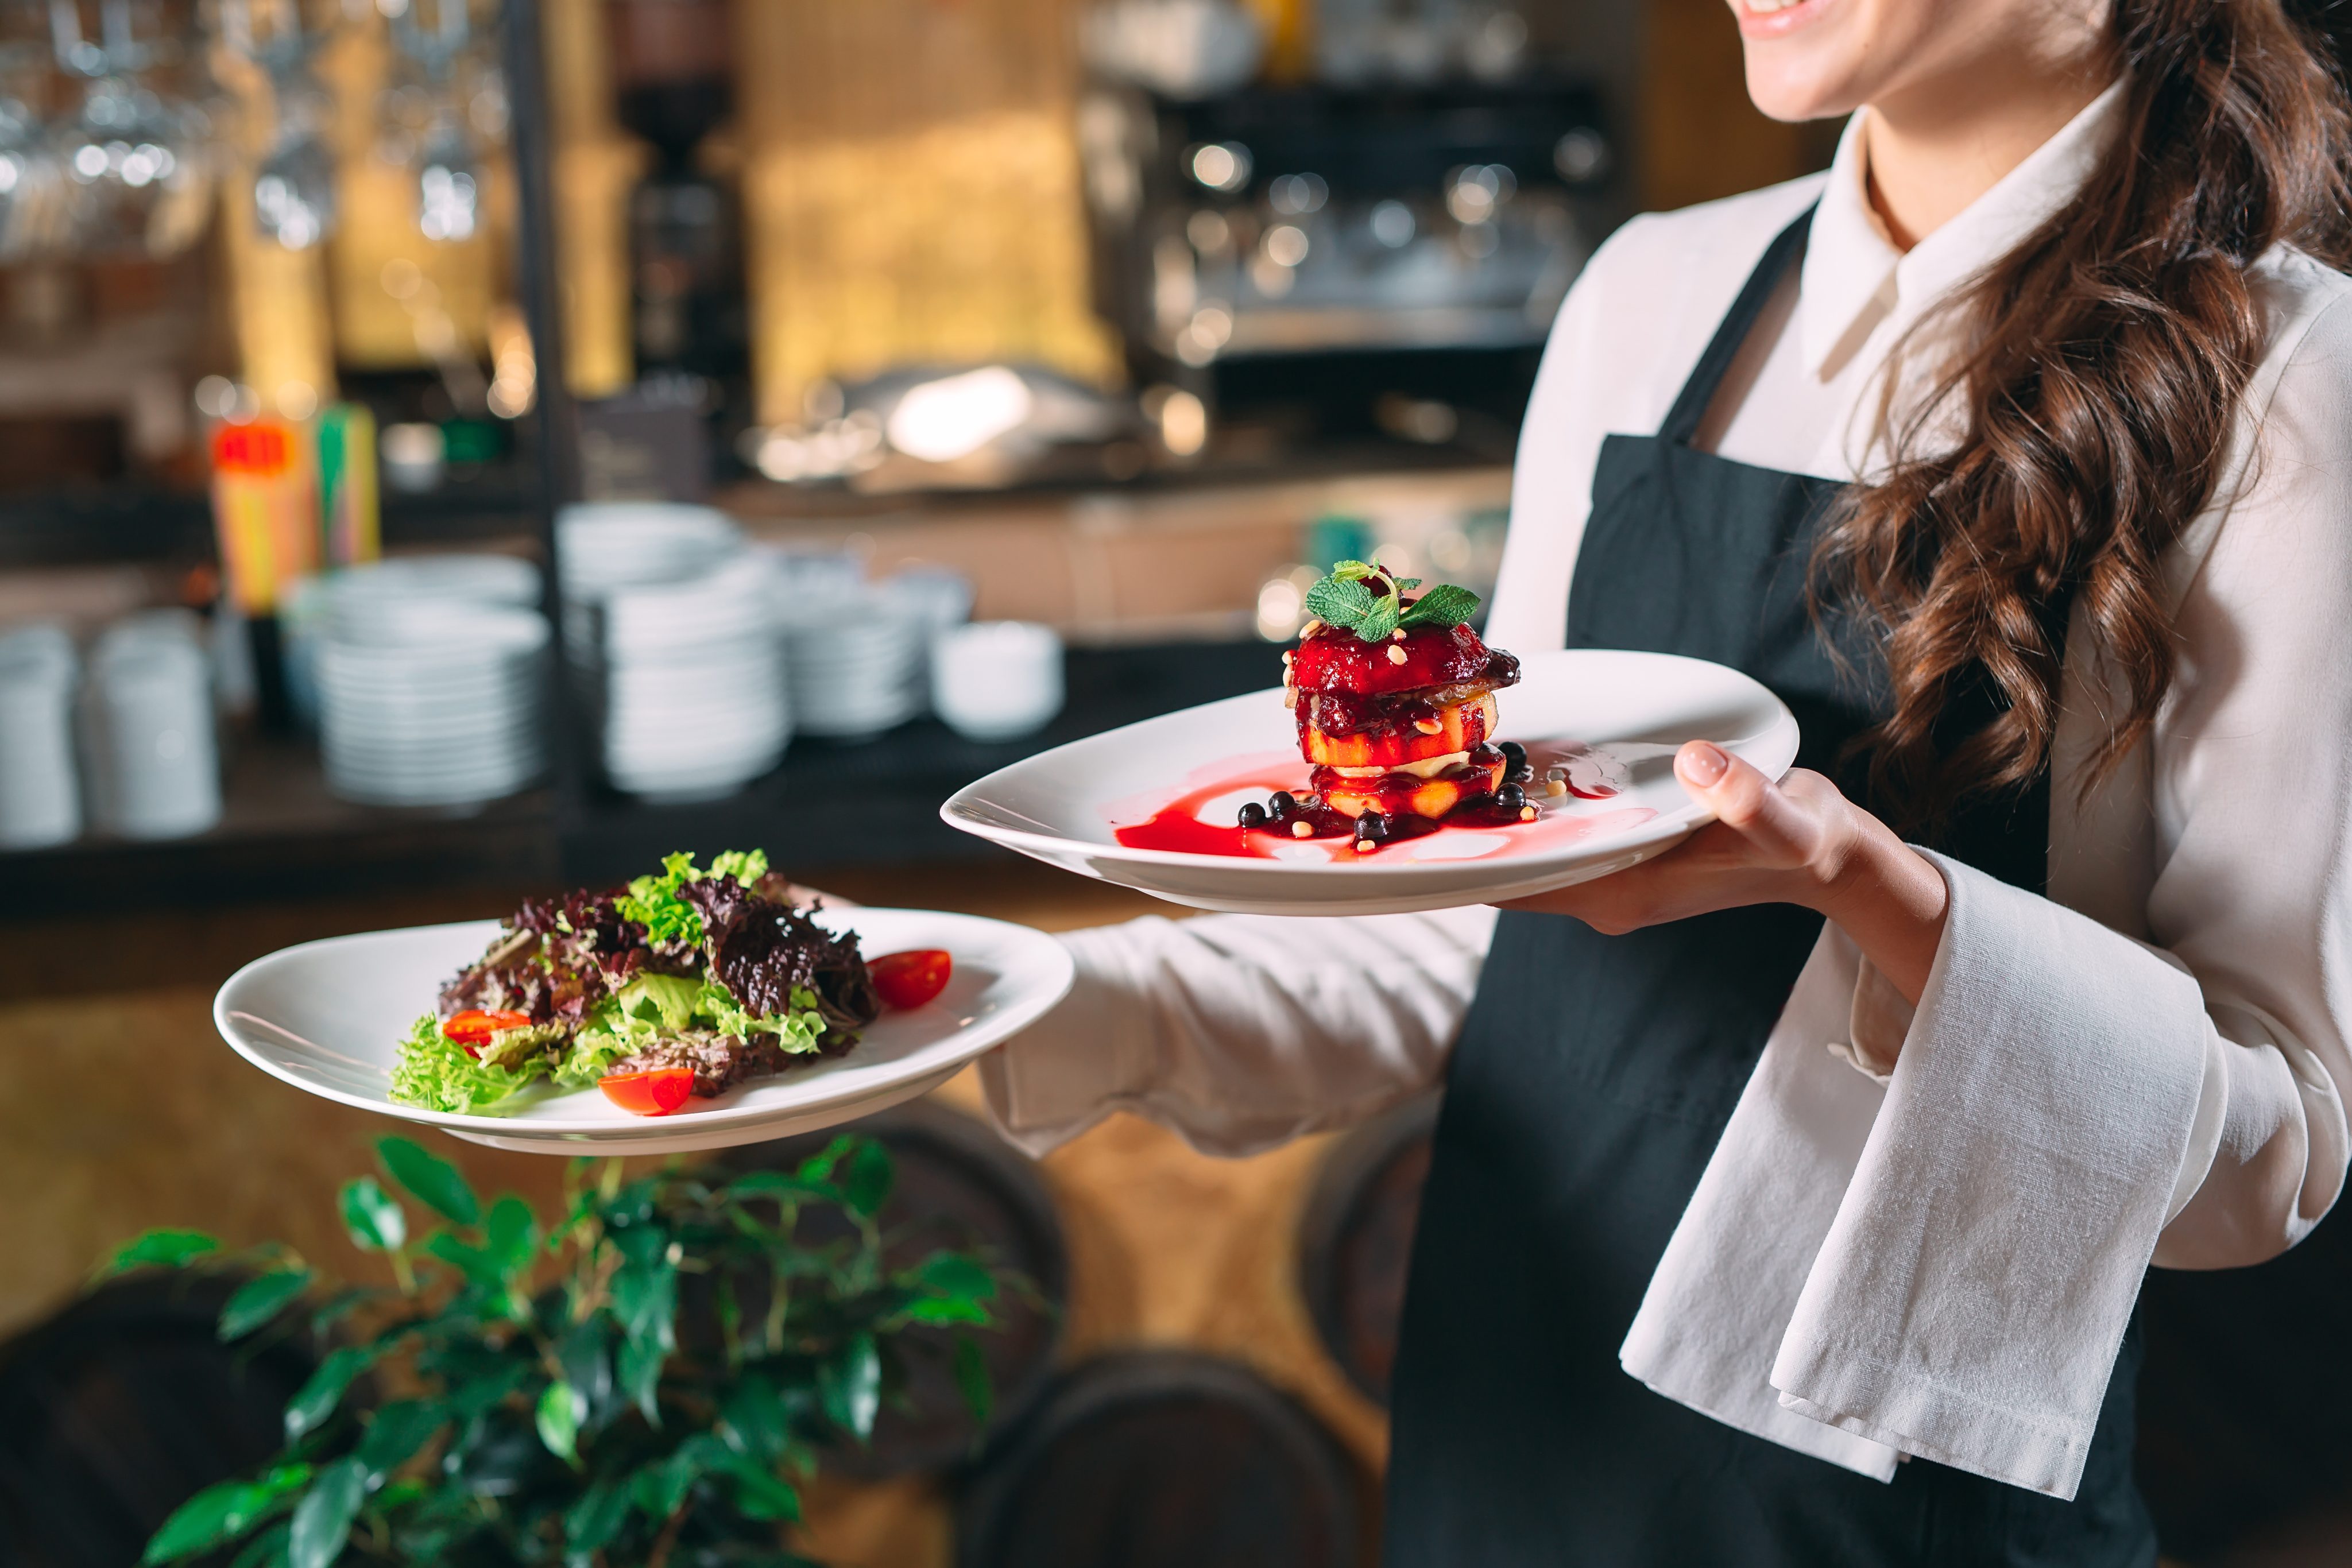 A waitress holding a plate of locally-sourced gourmet salad and a dessert in a Huntington Beach, California restaurant.